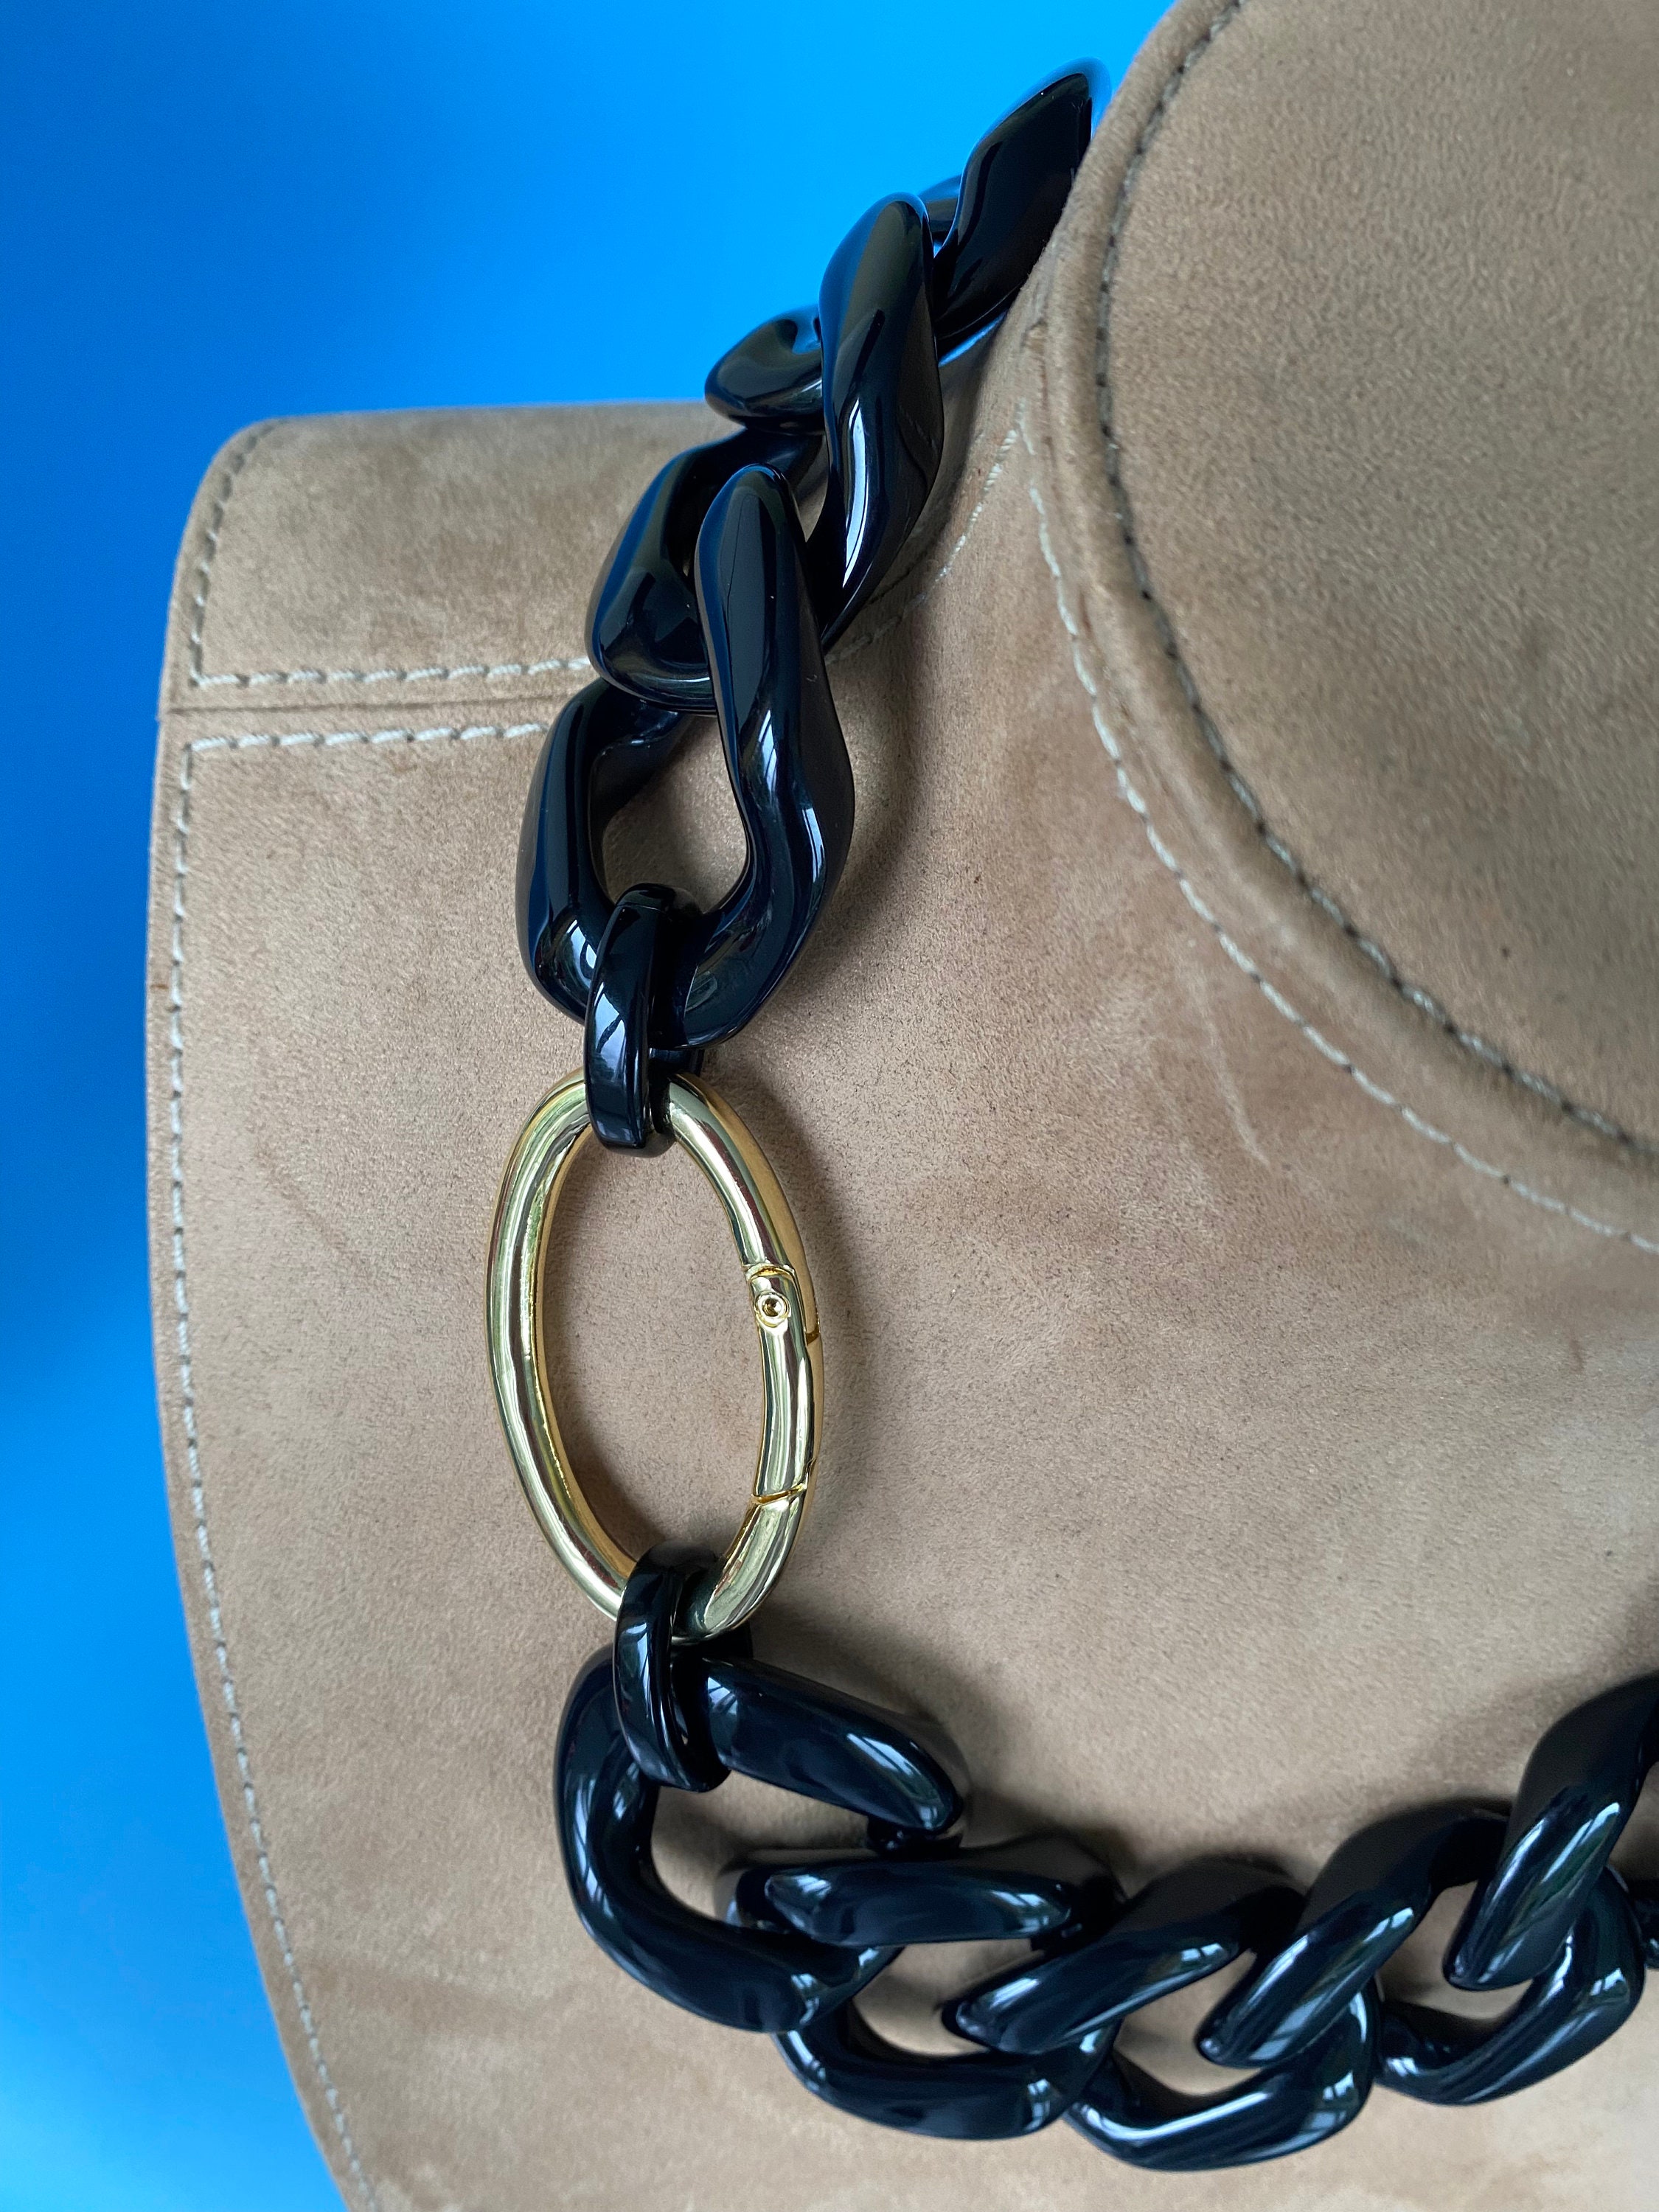 Chunky Black Chain Link Choker Flat Chain Necklace Large 